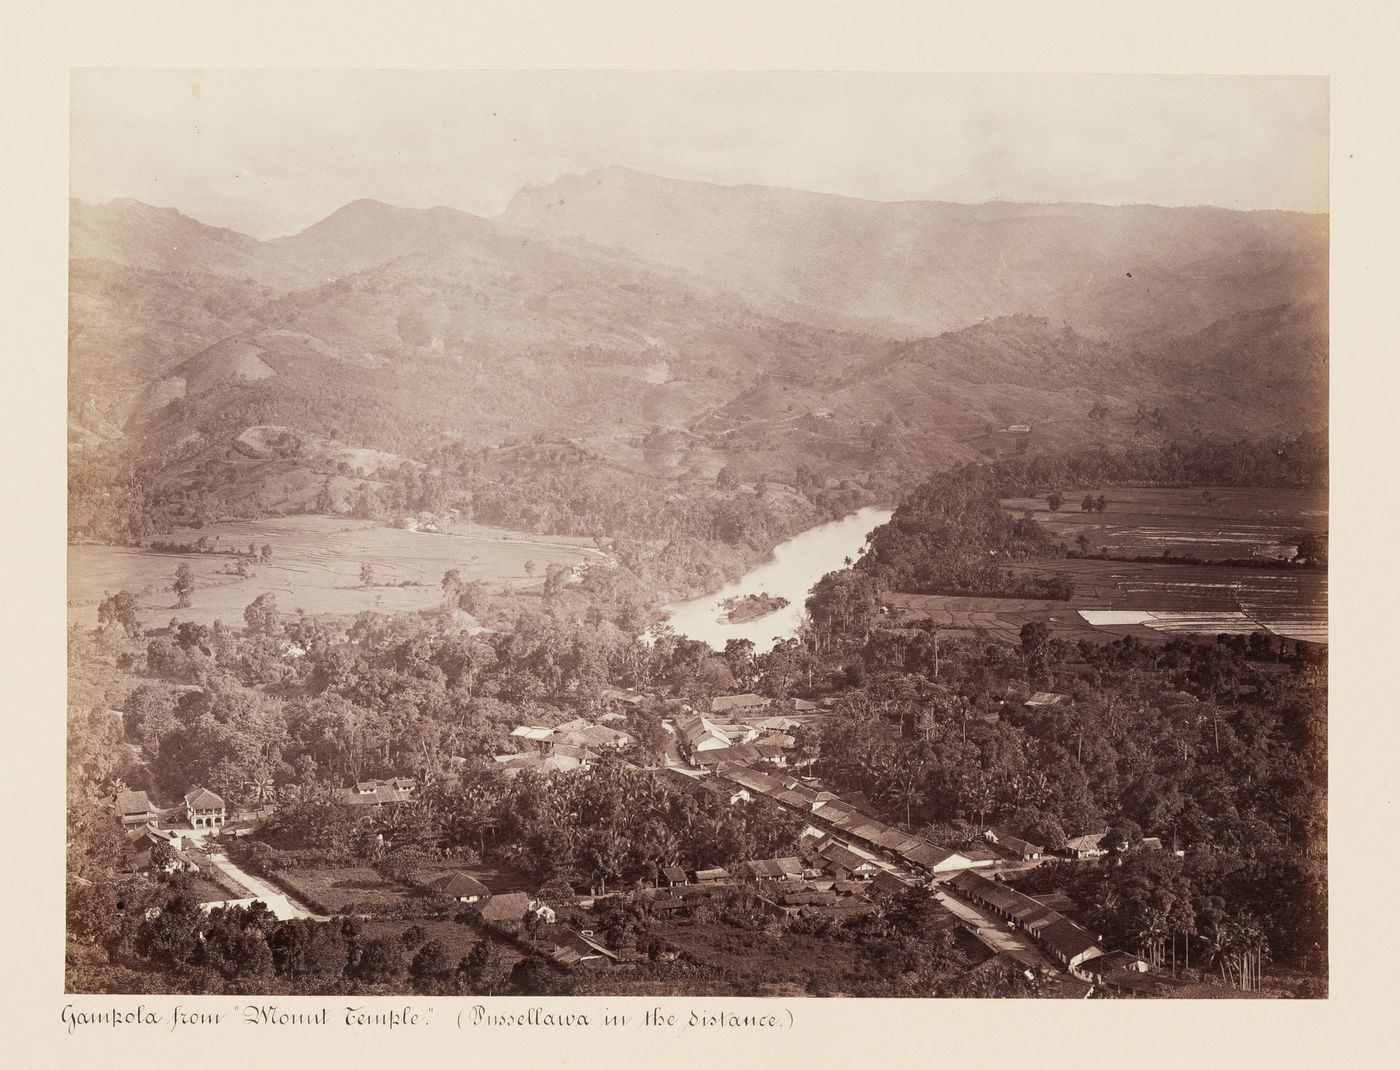 Partial view of Gampola from Mount Temple showing a river with mountains in the background, Ceylon (now Sri Lanka)